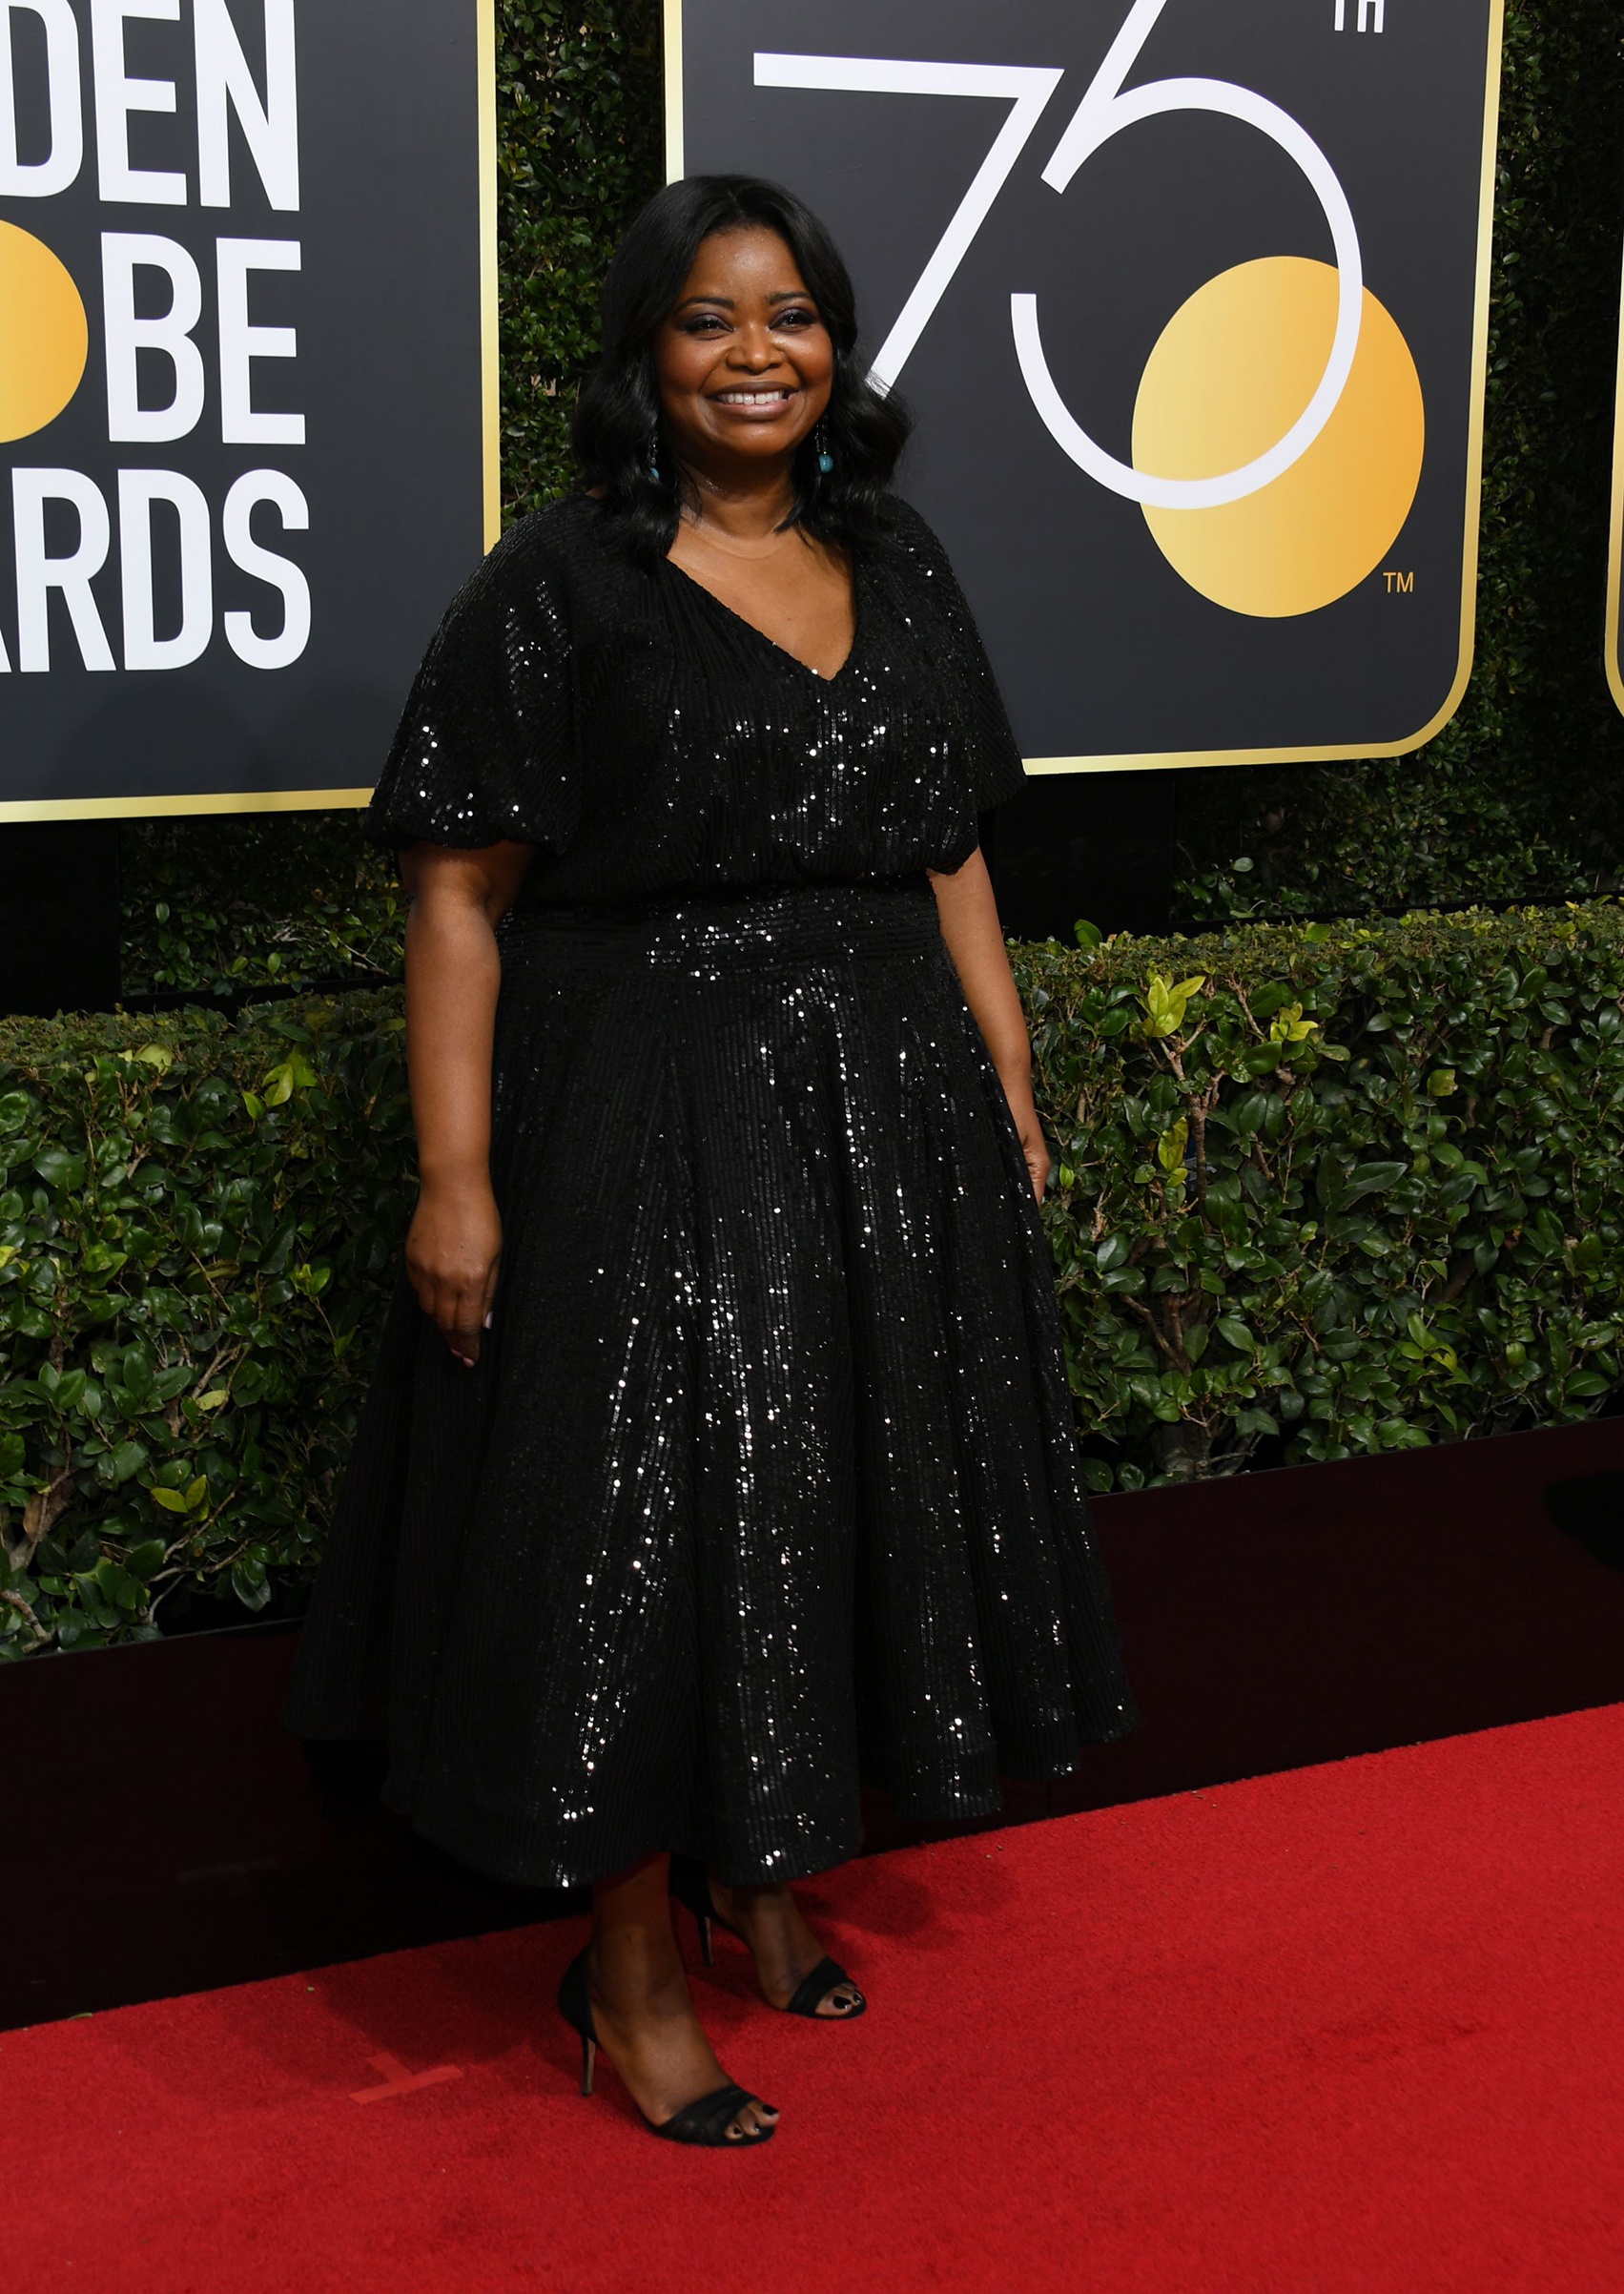 Actresses Octavia Spencer arrives for the 75th Golden Globe Awards on January 7, 2018, in Beverly Hills, California.